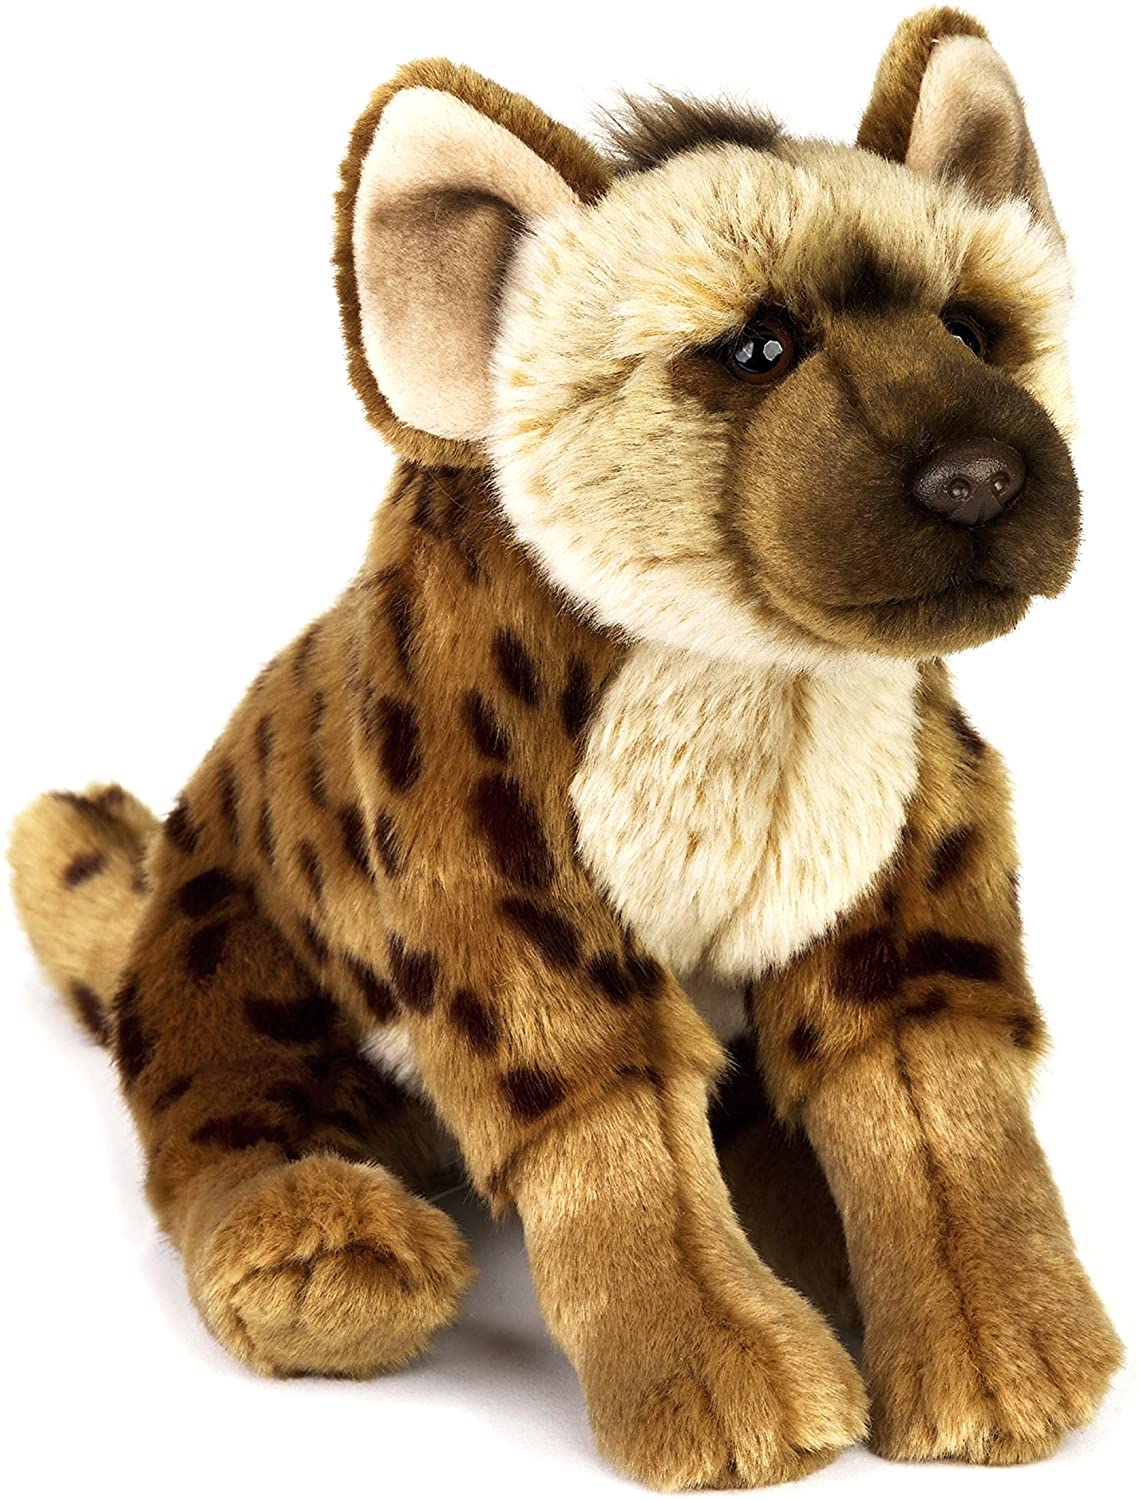 NATIONAL GEOGRAPHIC Spotted Hyena Plush, Brown